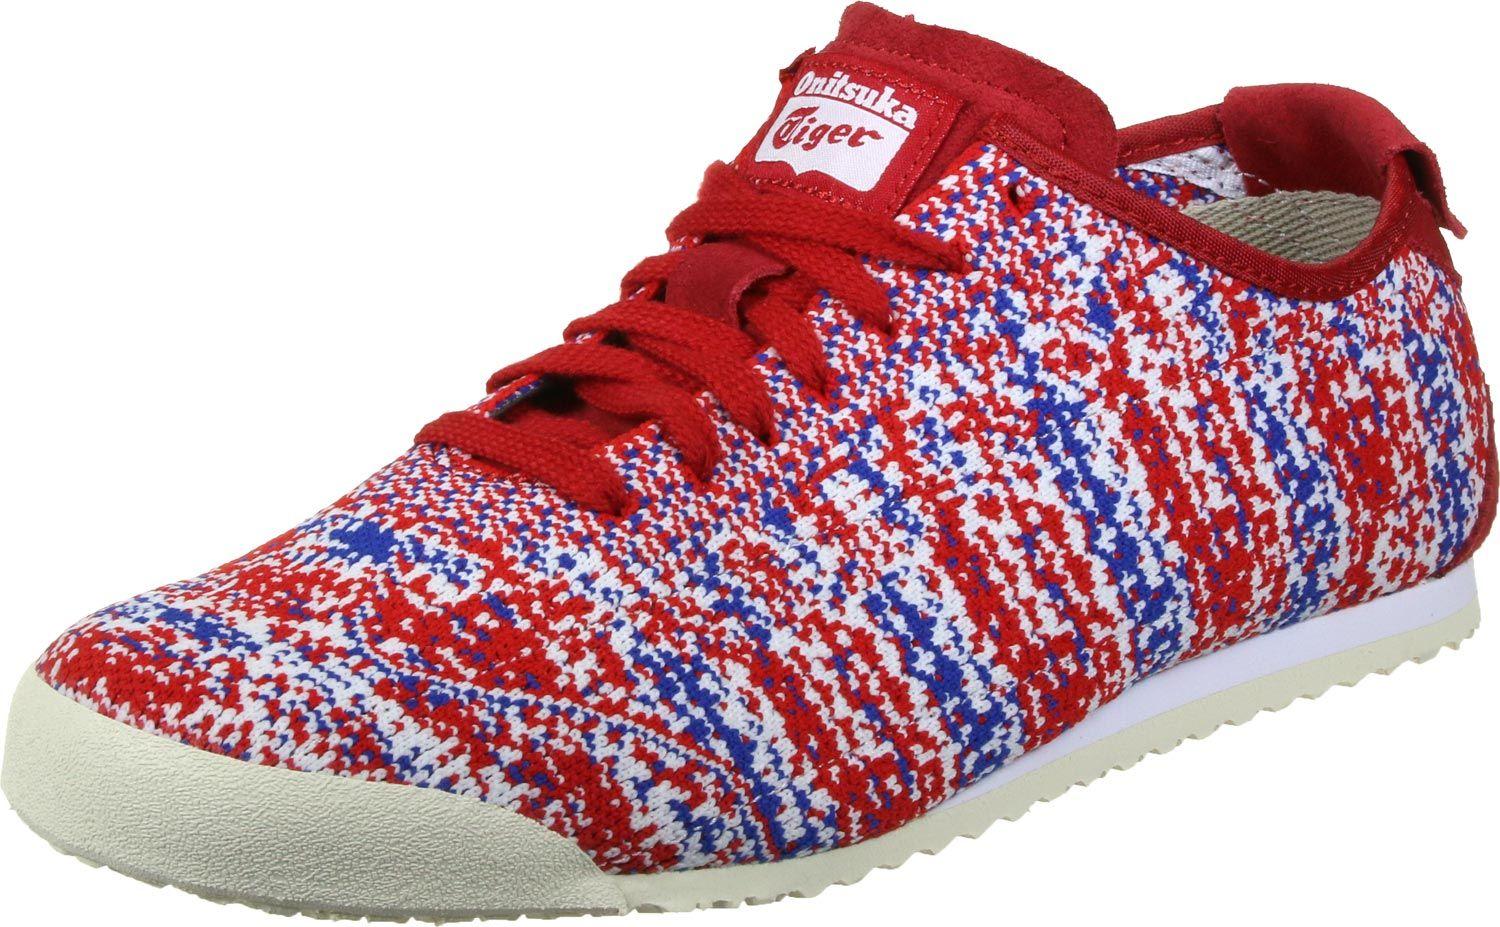 Red and Blue Tiger Logo - Onitsuka Tiger Mexico 66 Knit shoes red blue Shop XSTVMU